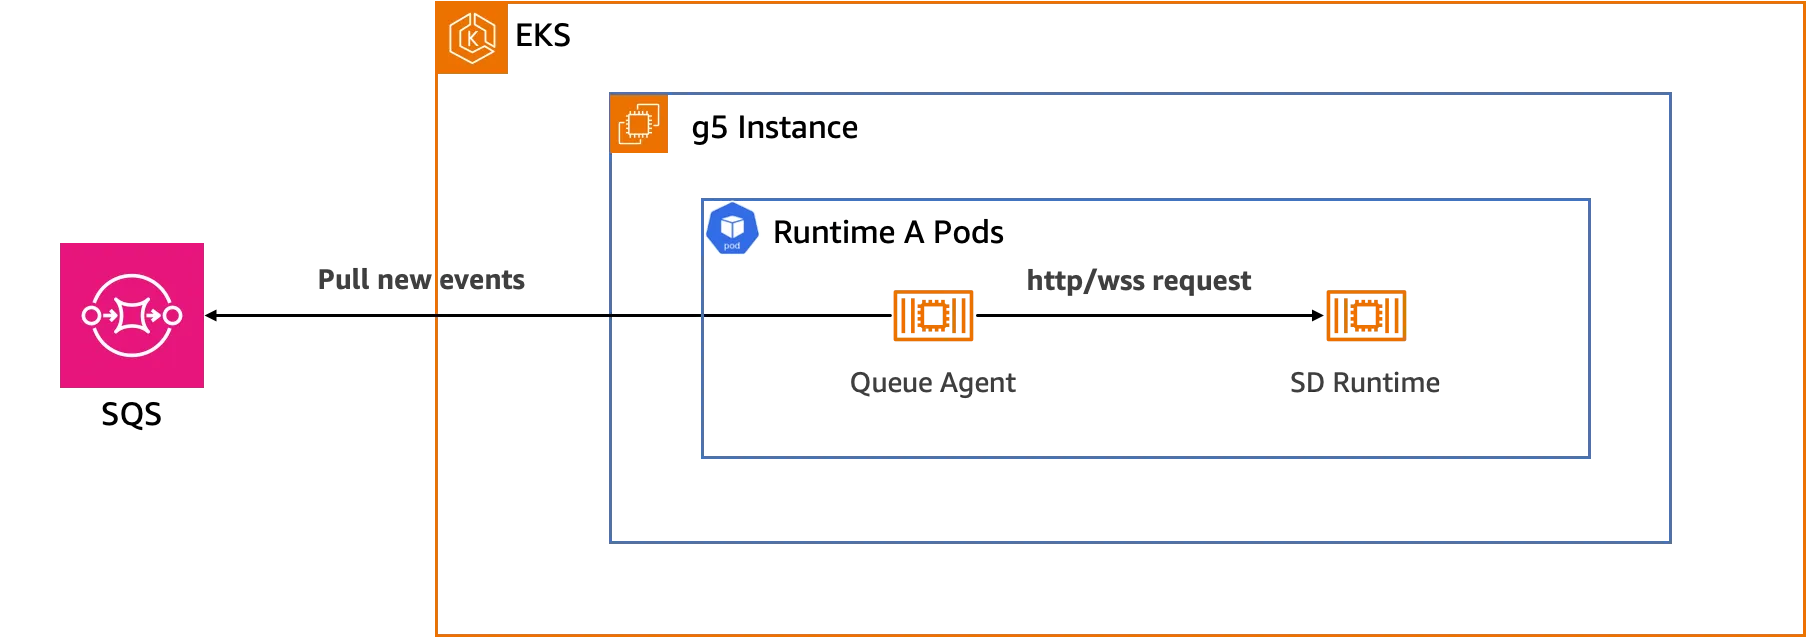 Using Queue Agent for Asynchronous Inference